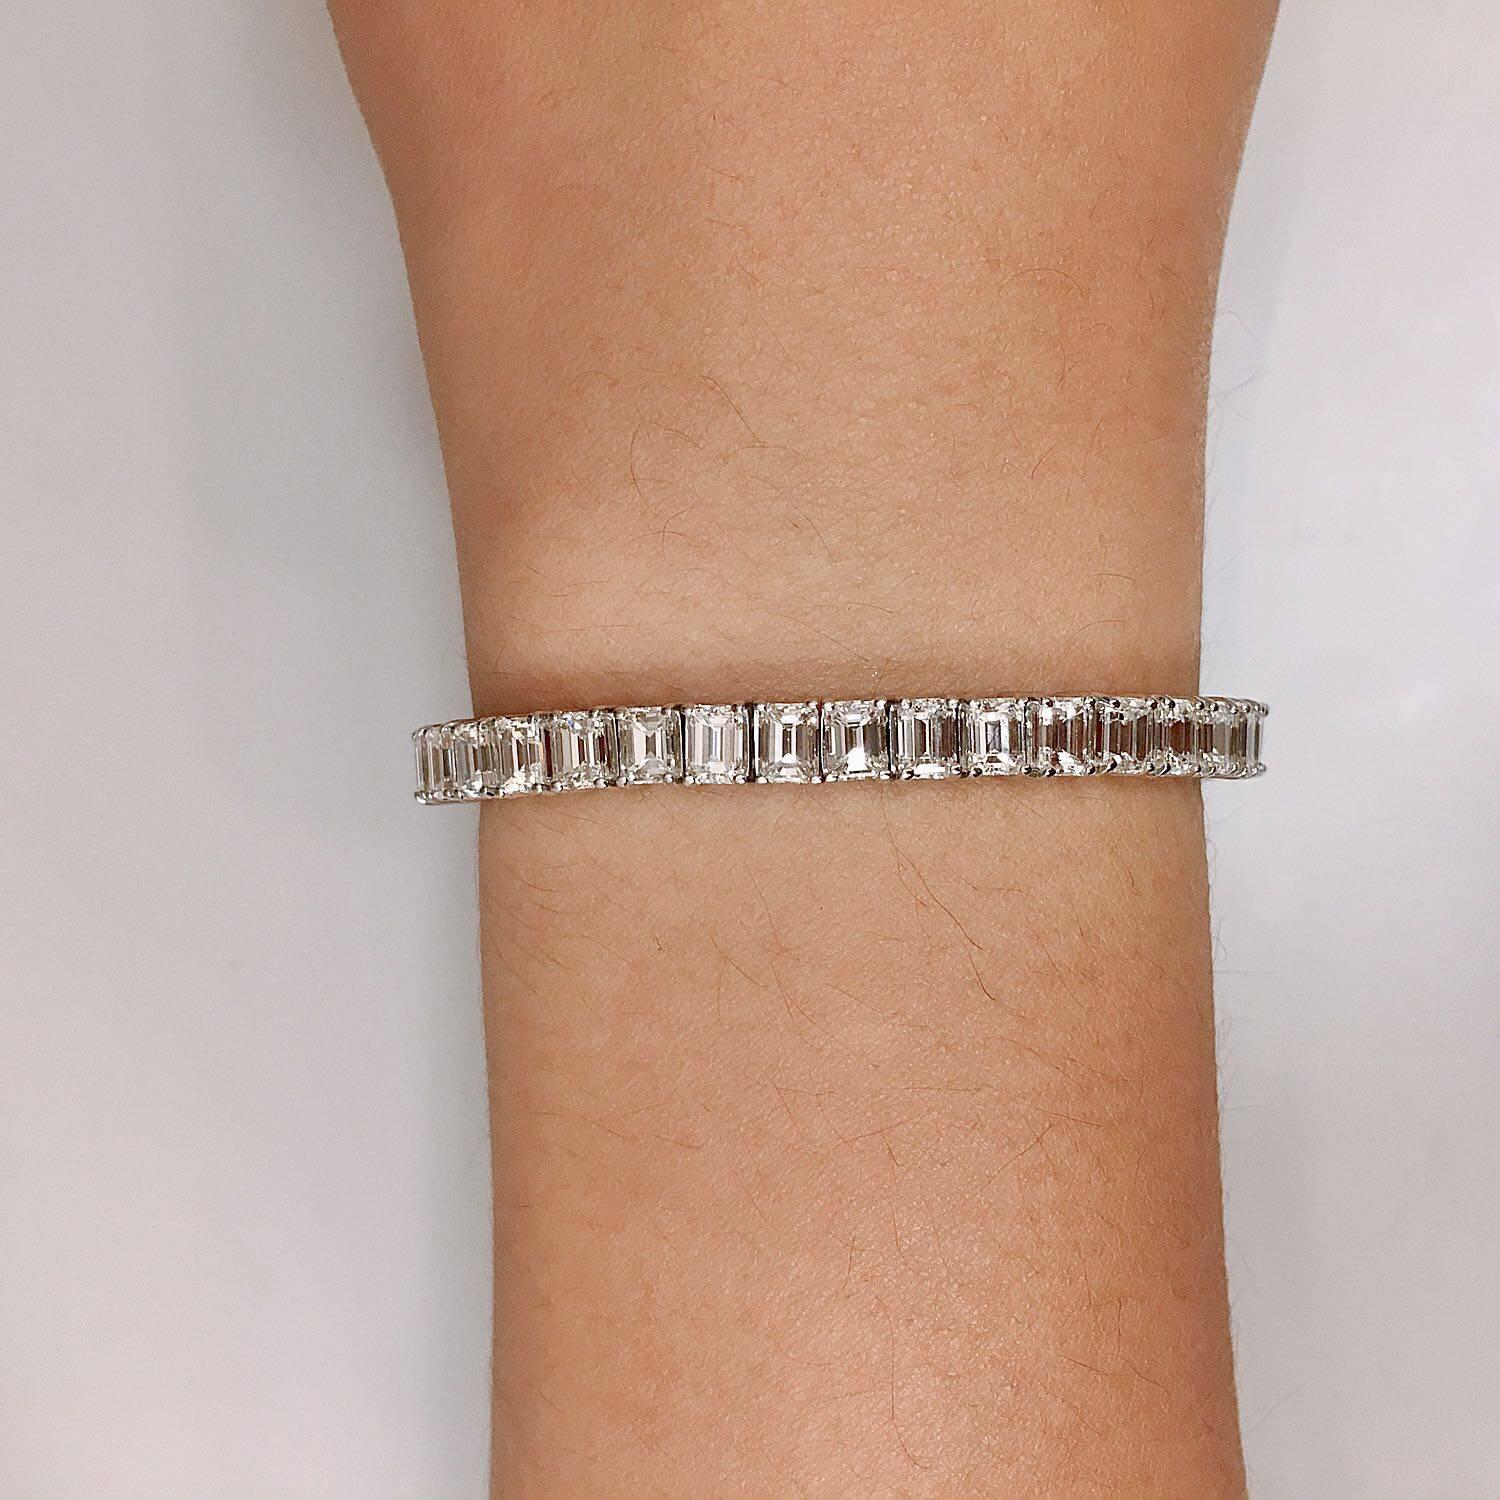 Approx. 14.00 carat total weight of perfectly cut emerald cut diamonds.The finest conflict free diamonds set in our unique endless diamond bracelet. (Standard length is about 7 inches however we can alter this bracelet to any size wrist). Can be